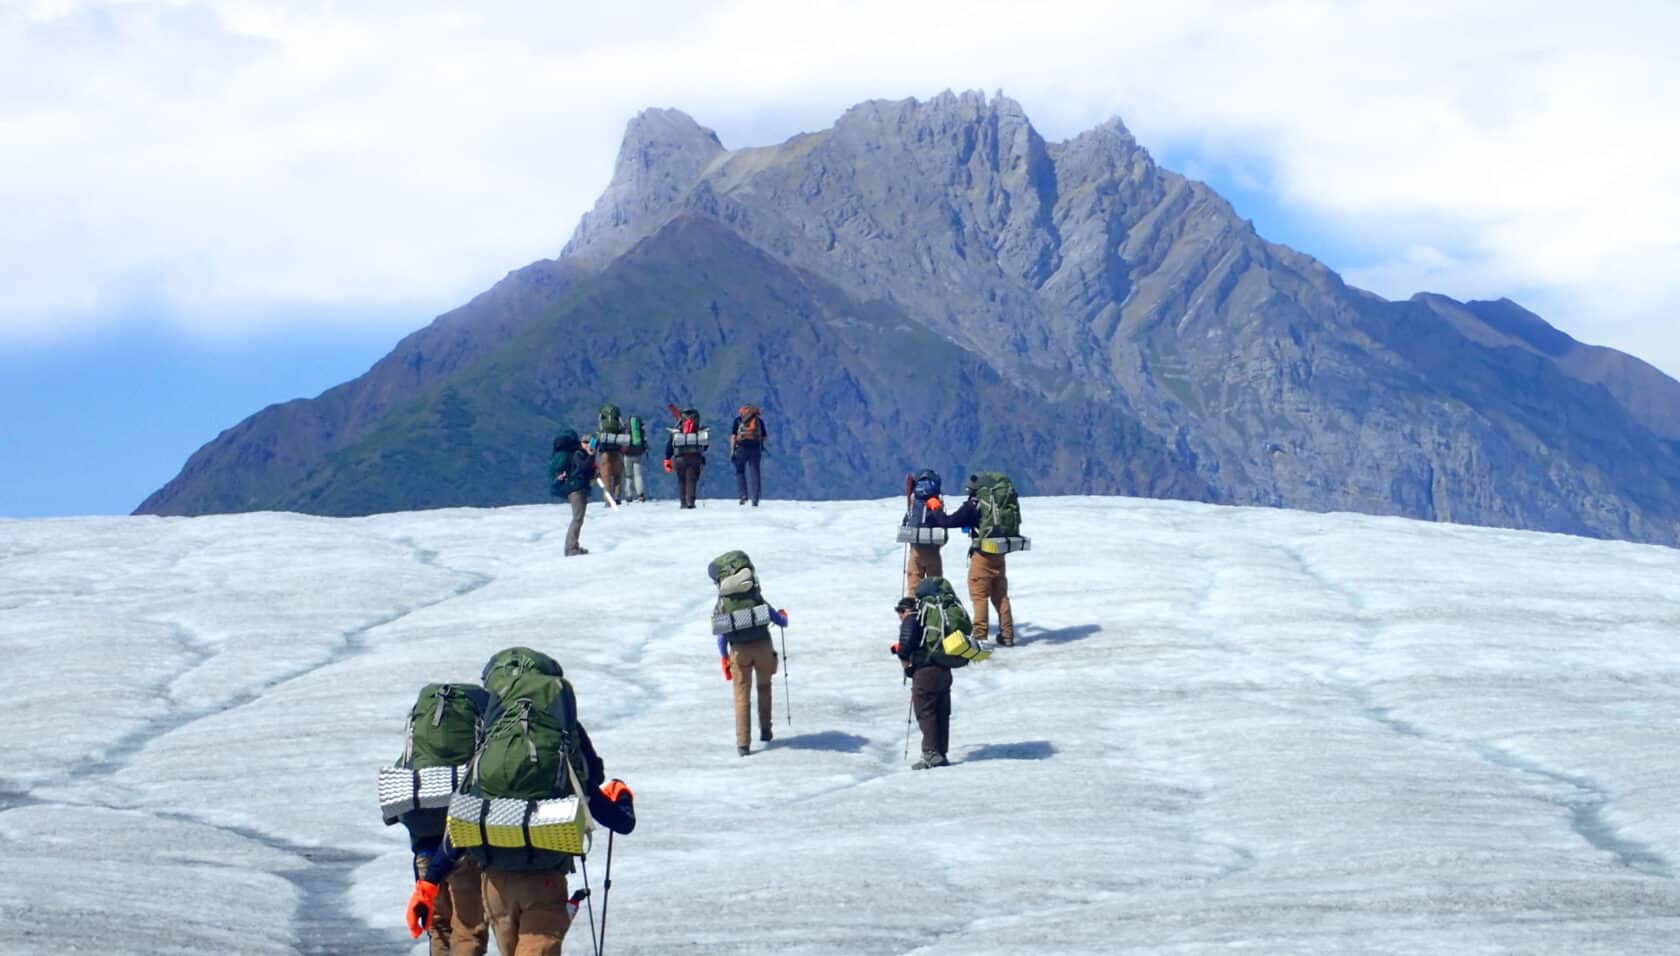 A group of people backpacking up a mountain in Alaska.